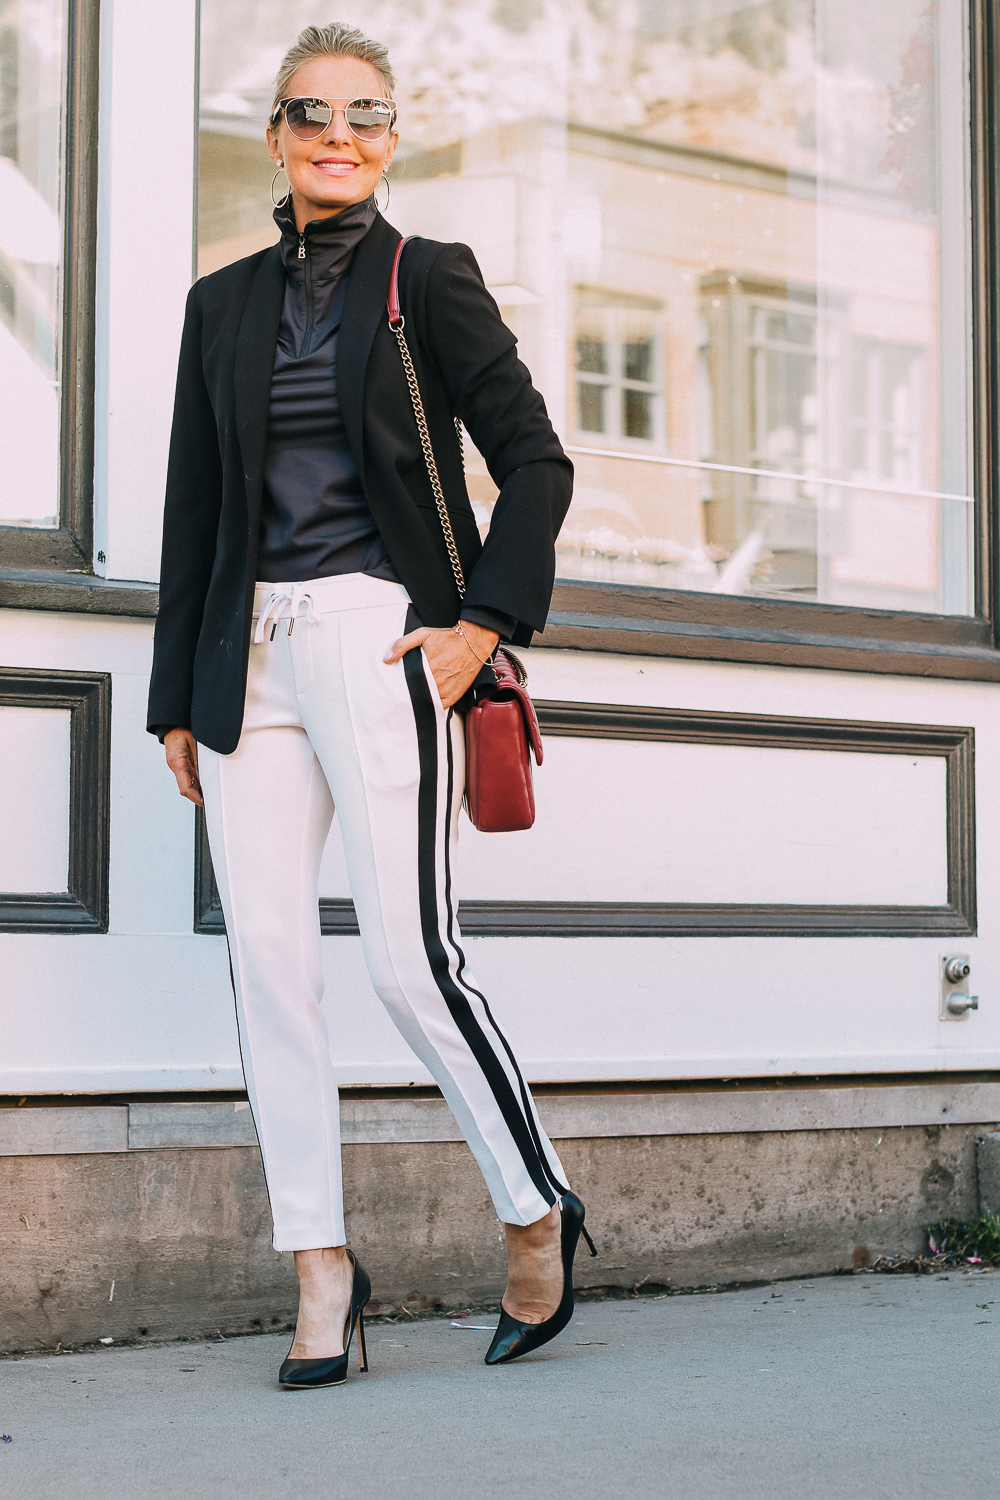 Henri Bendel quilted crossbody bag in burgundy with gold chain link detail paired with Pam & Gela striped pants, Bogner turtleneck and black blazer